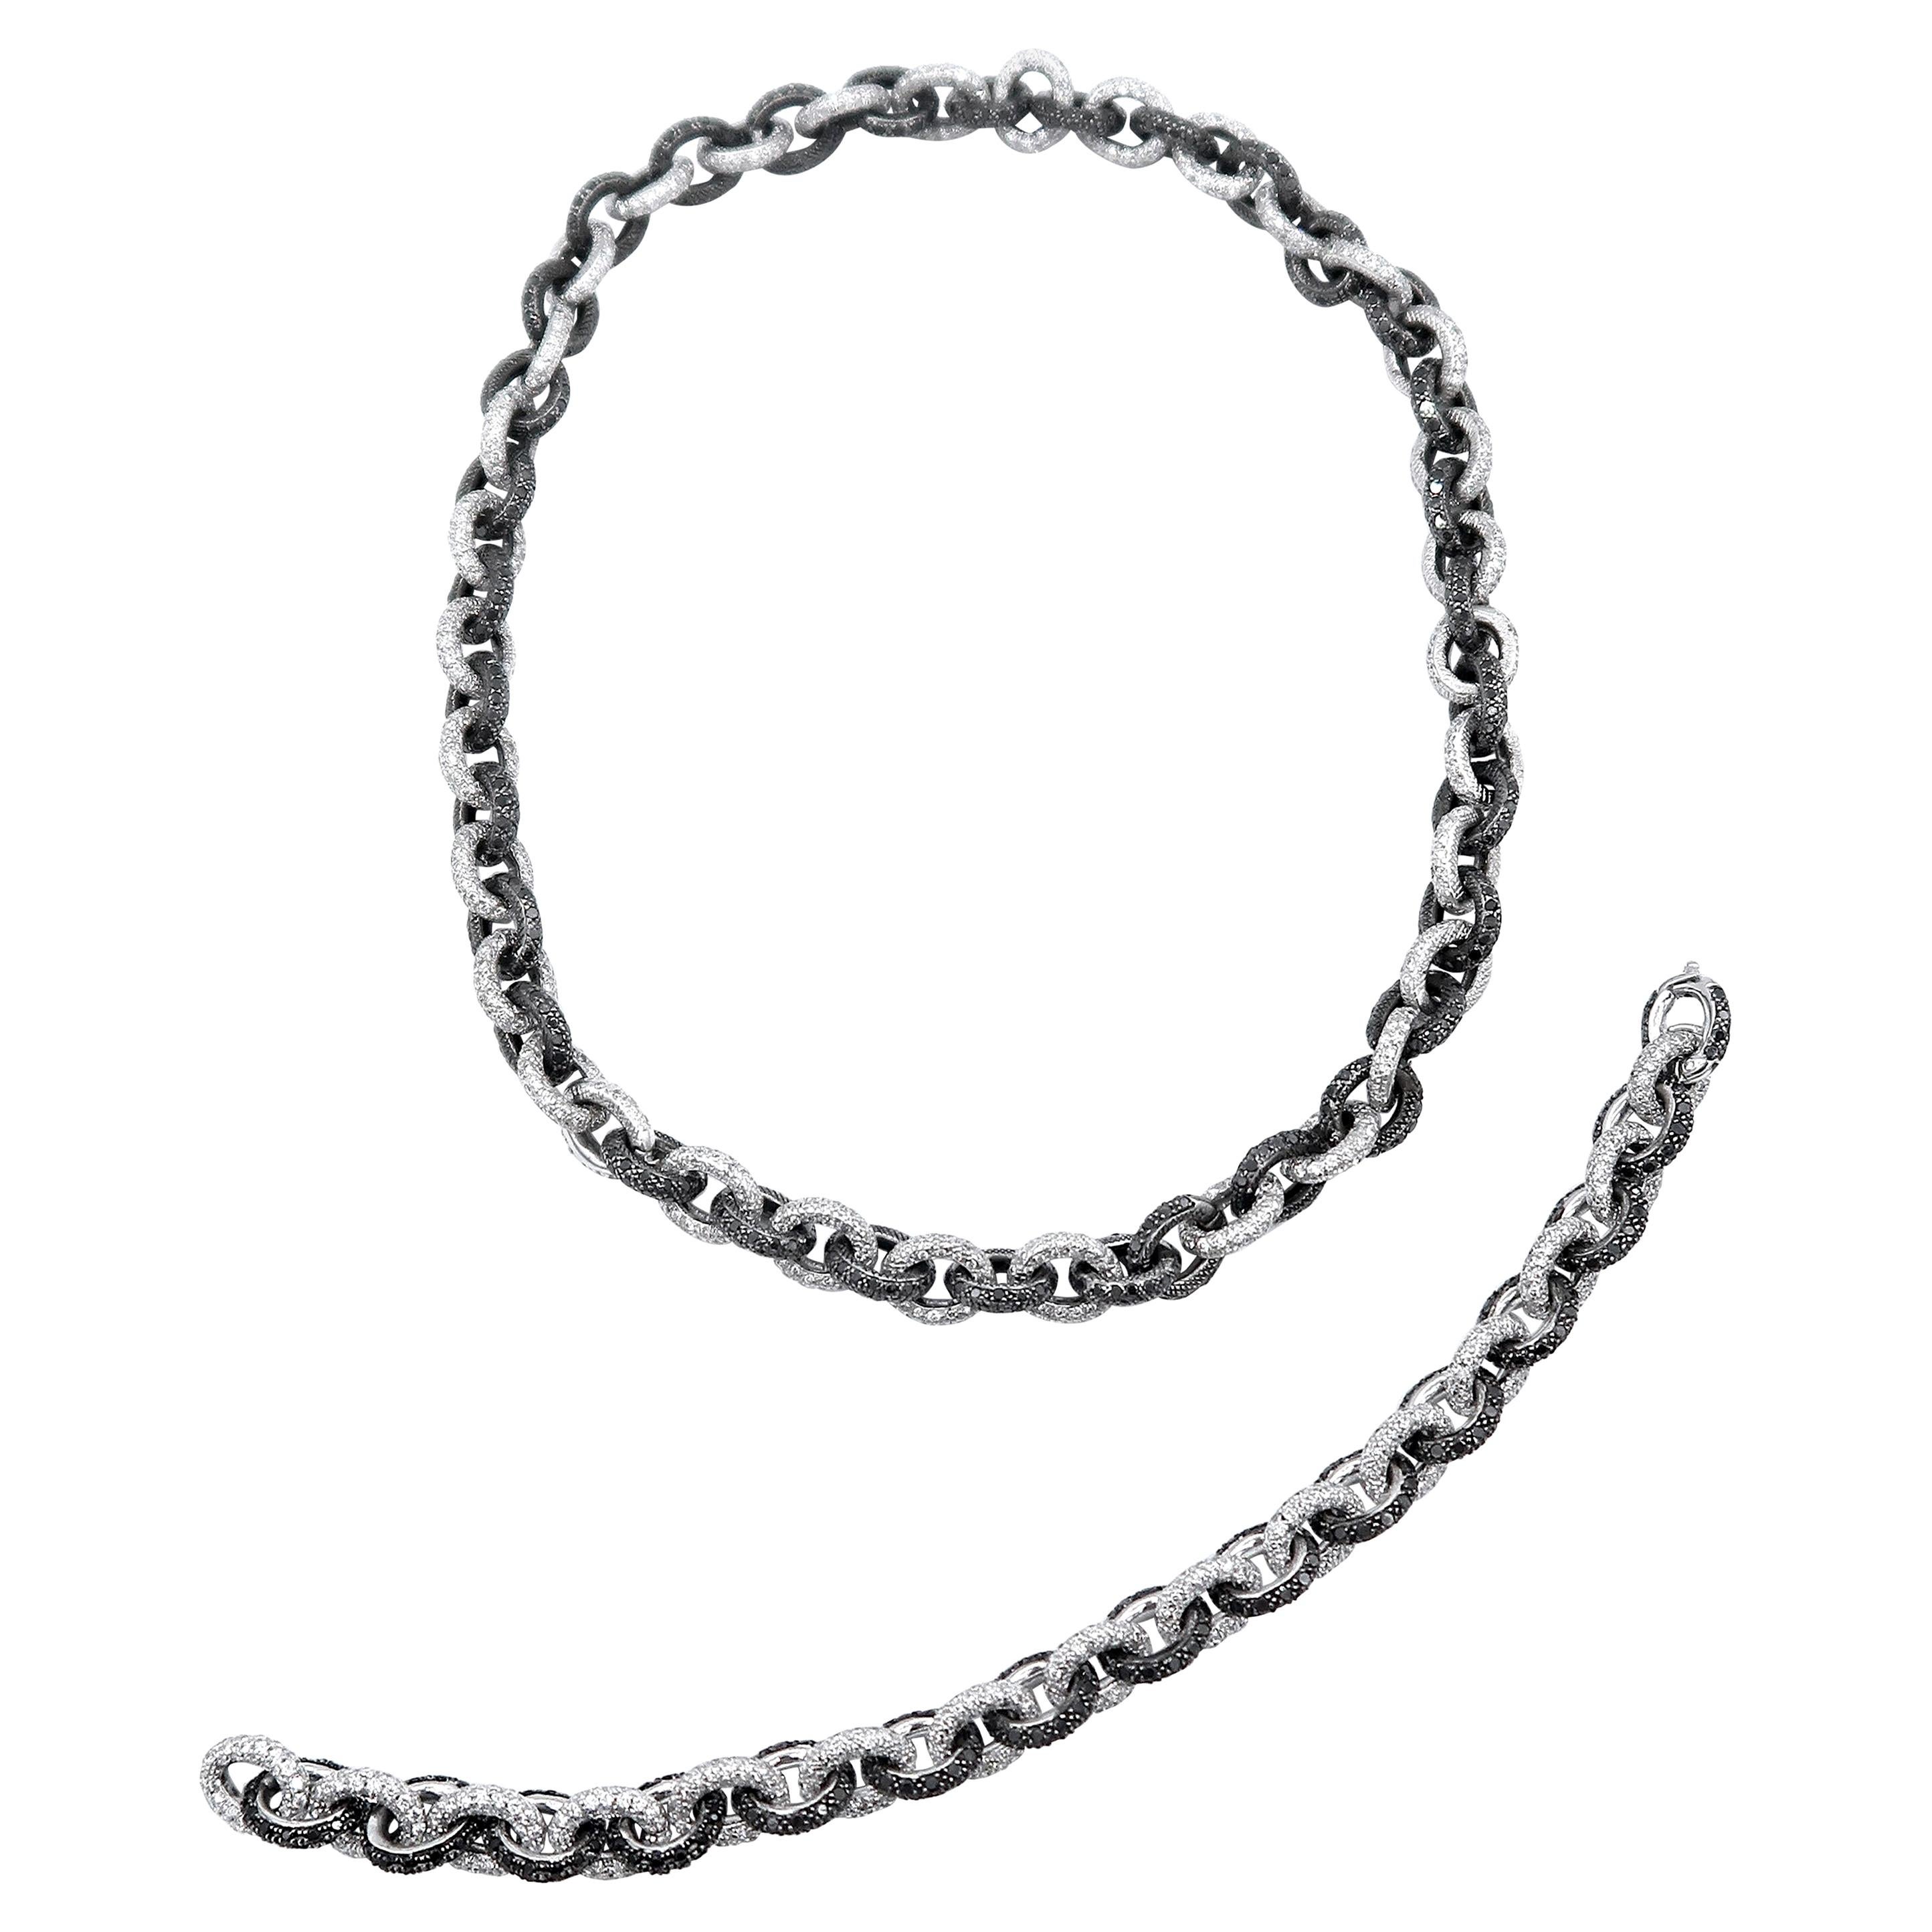 Boon Black White Diamond Pavé Link Chain Bracelet and Chain Necklace 18k Gold For Sale